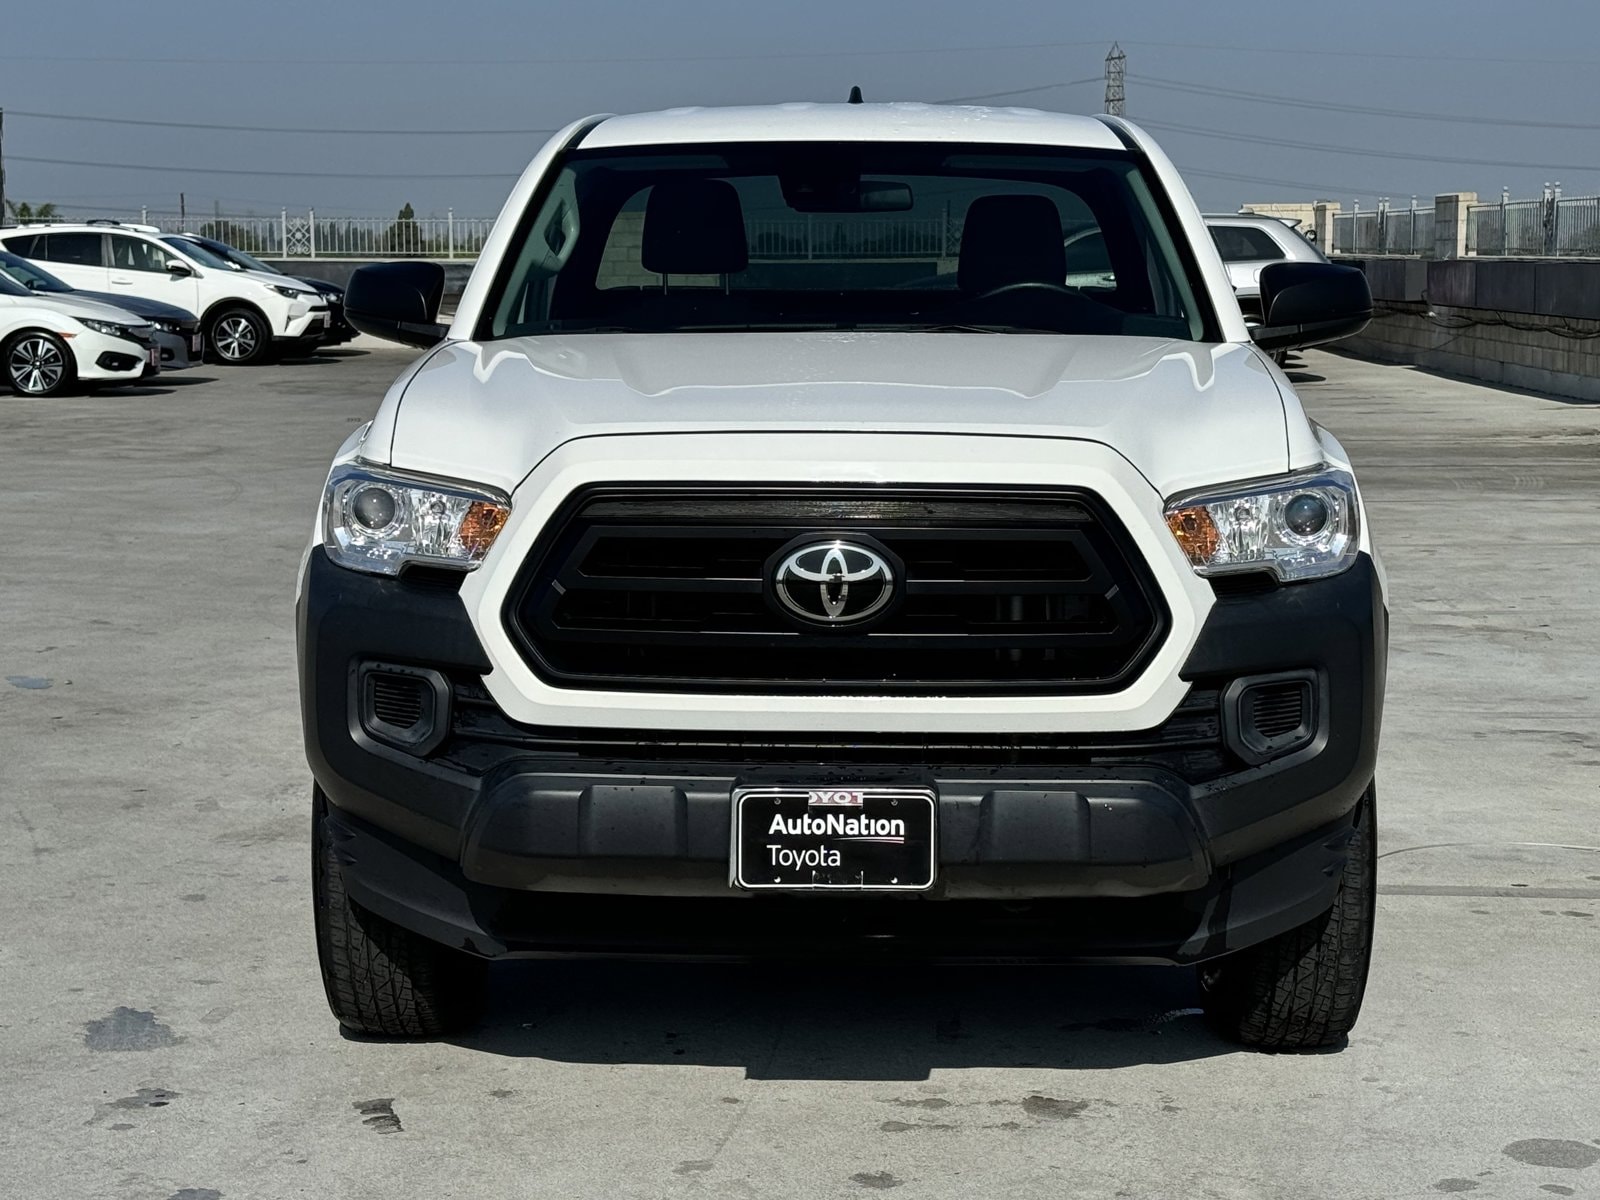 Used 2020 Toyota Tacoma SR with VIN 3TYRX5GN2LT001254 for sale in Cerritos, CA